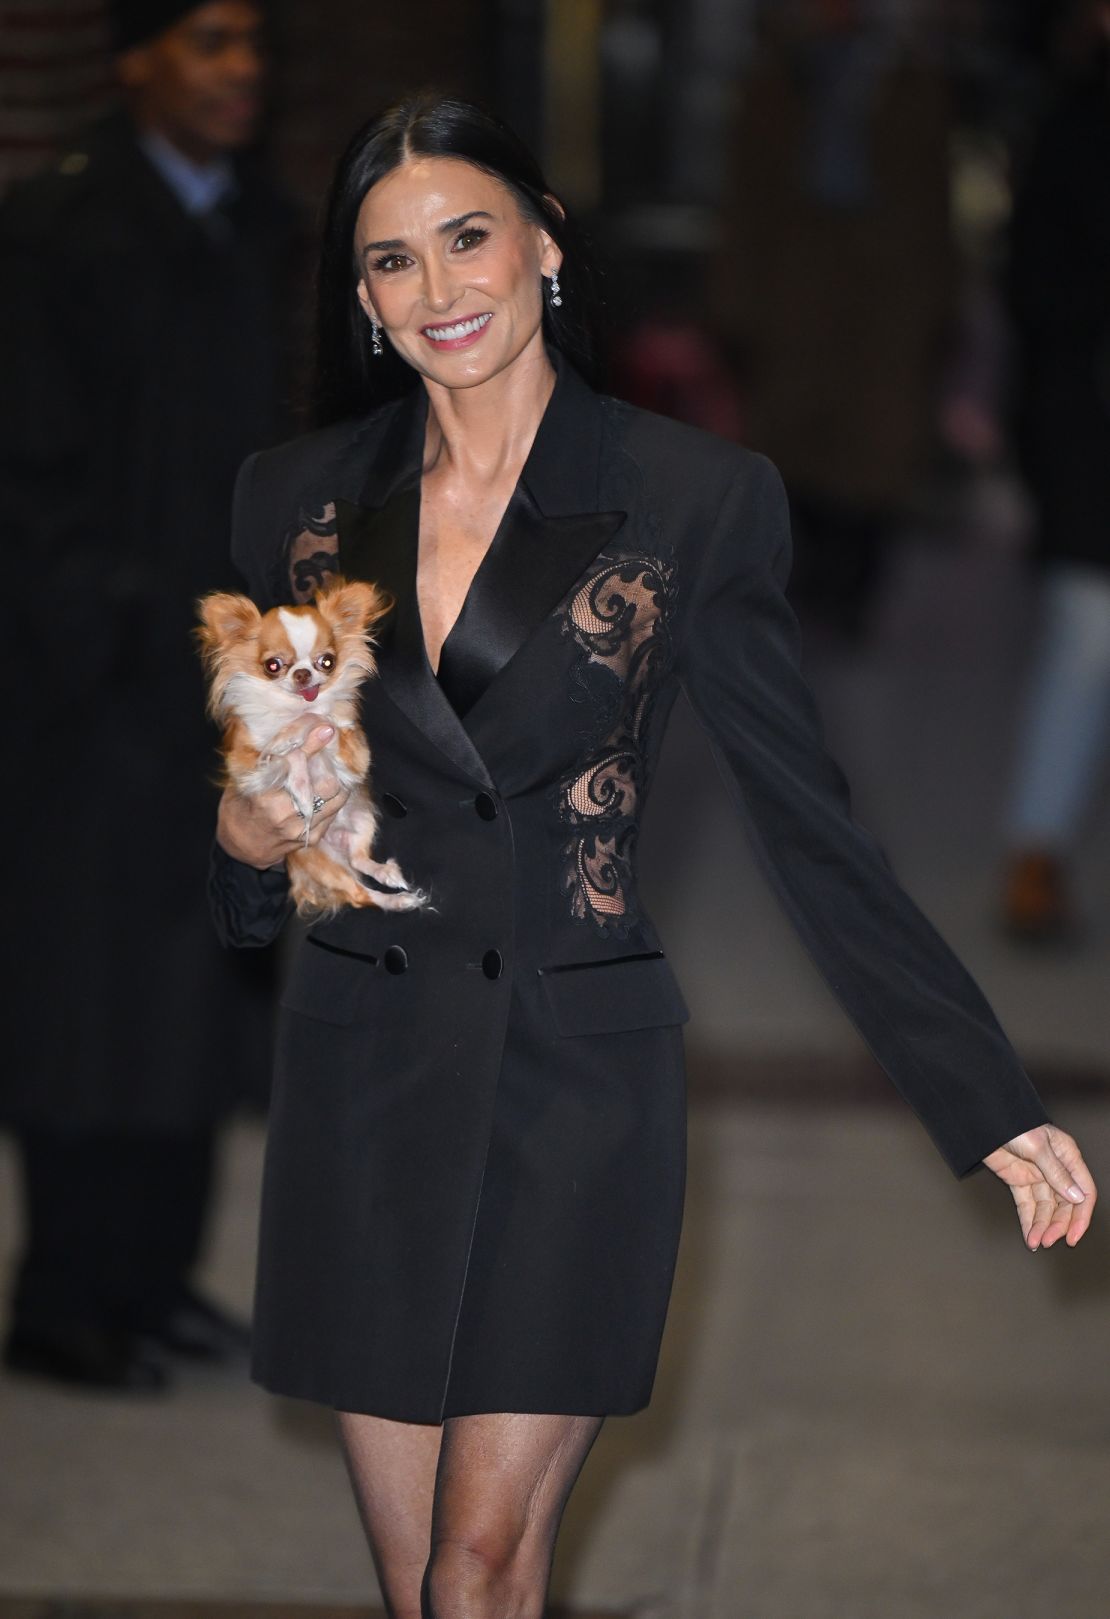 Wearing a Versace lace tailored blazer dress, Moore held Pilaf like a tiny fluffy clutch bag.